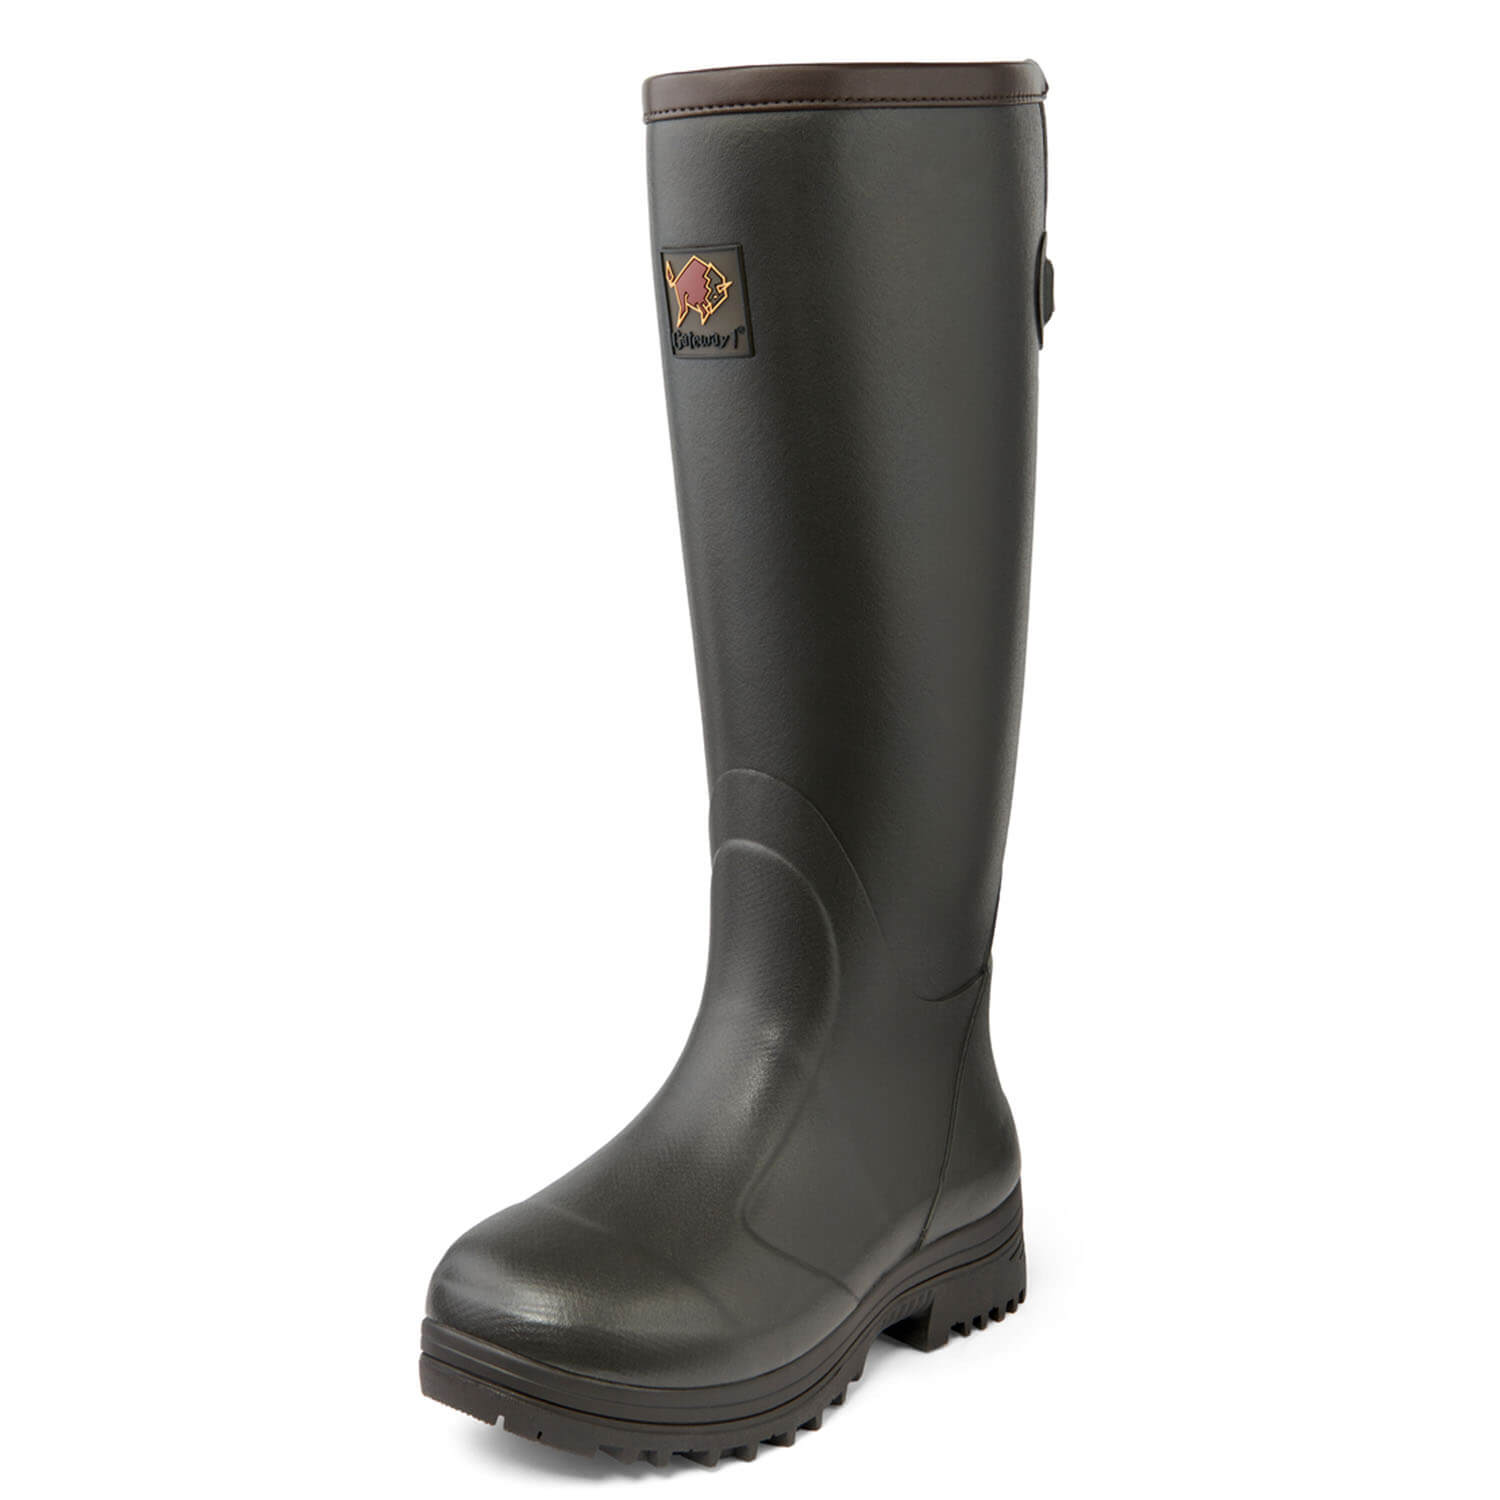 Gateway1 womens Rubber Boots Pheasant Game 17 5mm